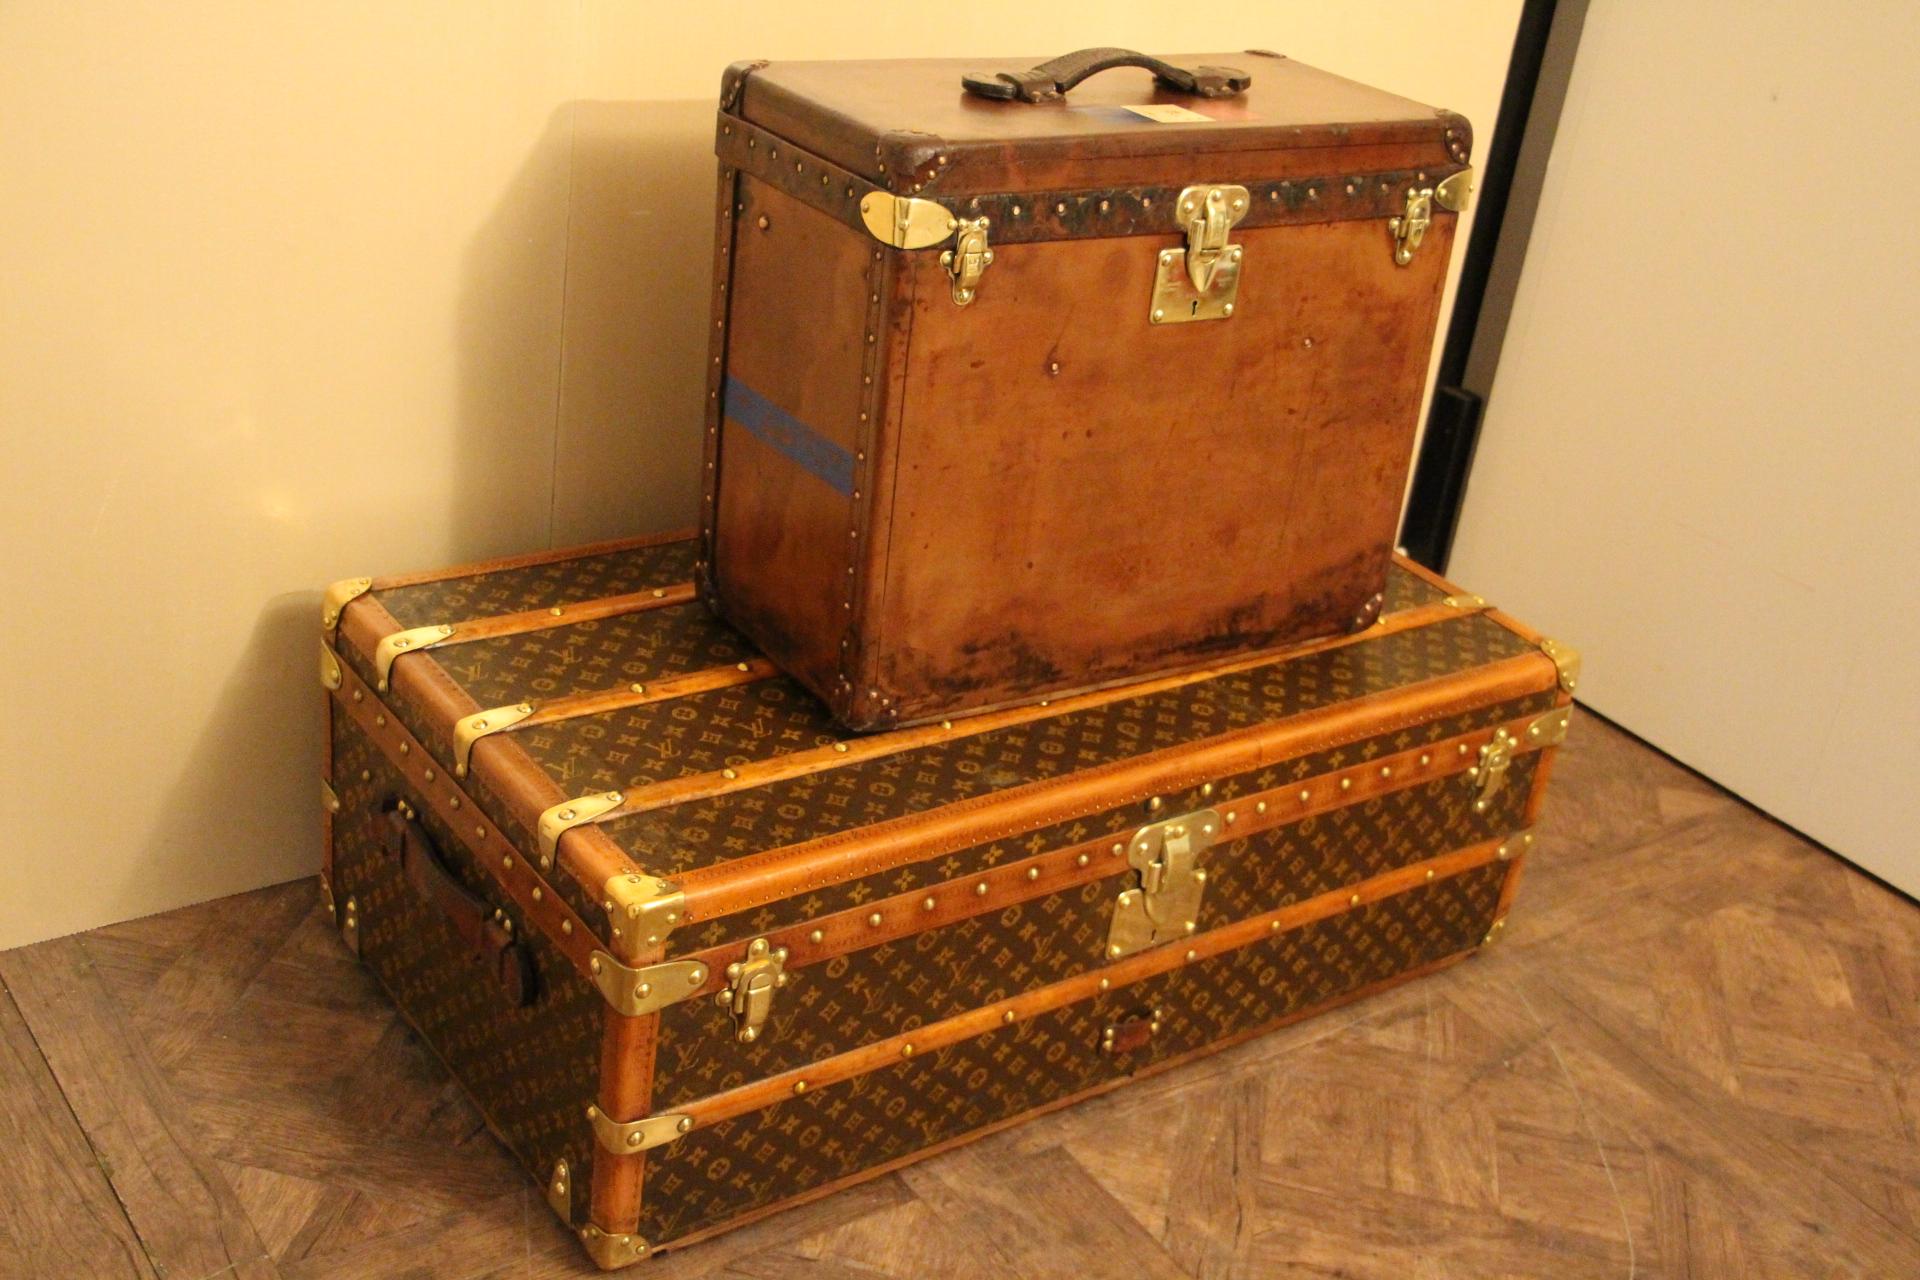 This Louis Vuitton trunk is very unusual by its dimensions and also due to the fact that it is all leather. 
Leather has got a very nice and very warm toffee color patina. It still has got its painted customized french flag on the top ans stribes